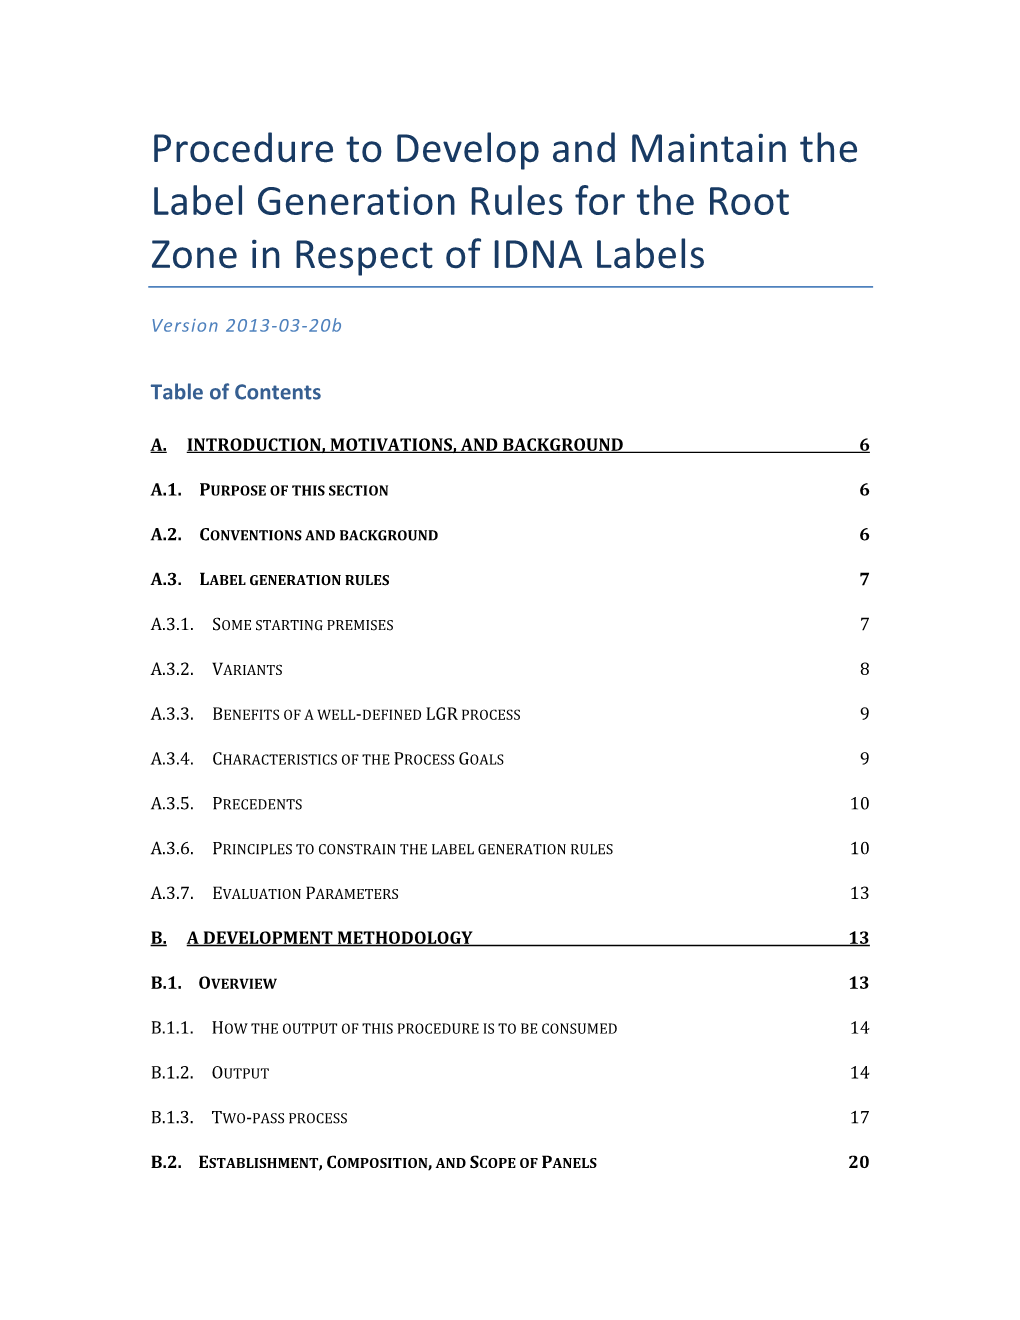 Procedure to Develop and Maintain the Label Generation Rules for the Root Zone in Respect of IDNA Labels